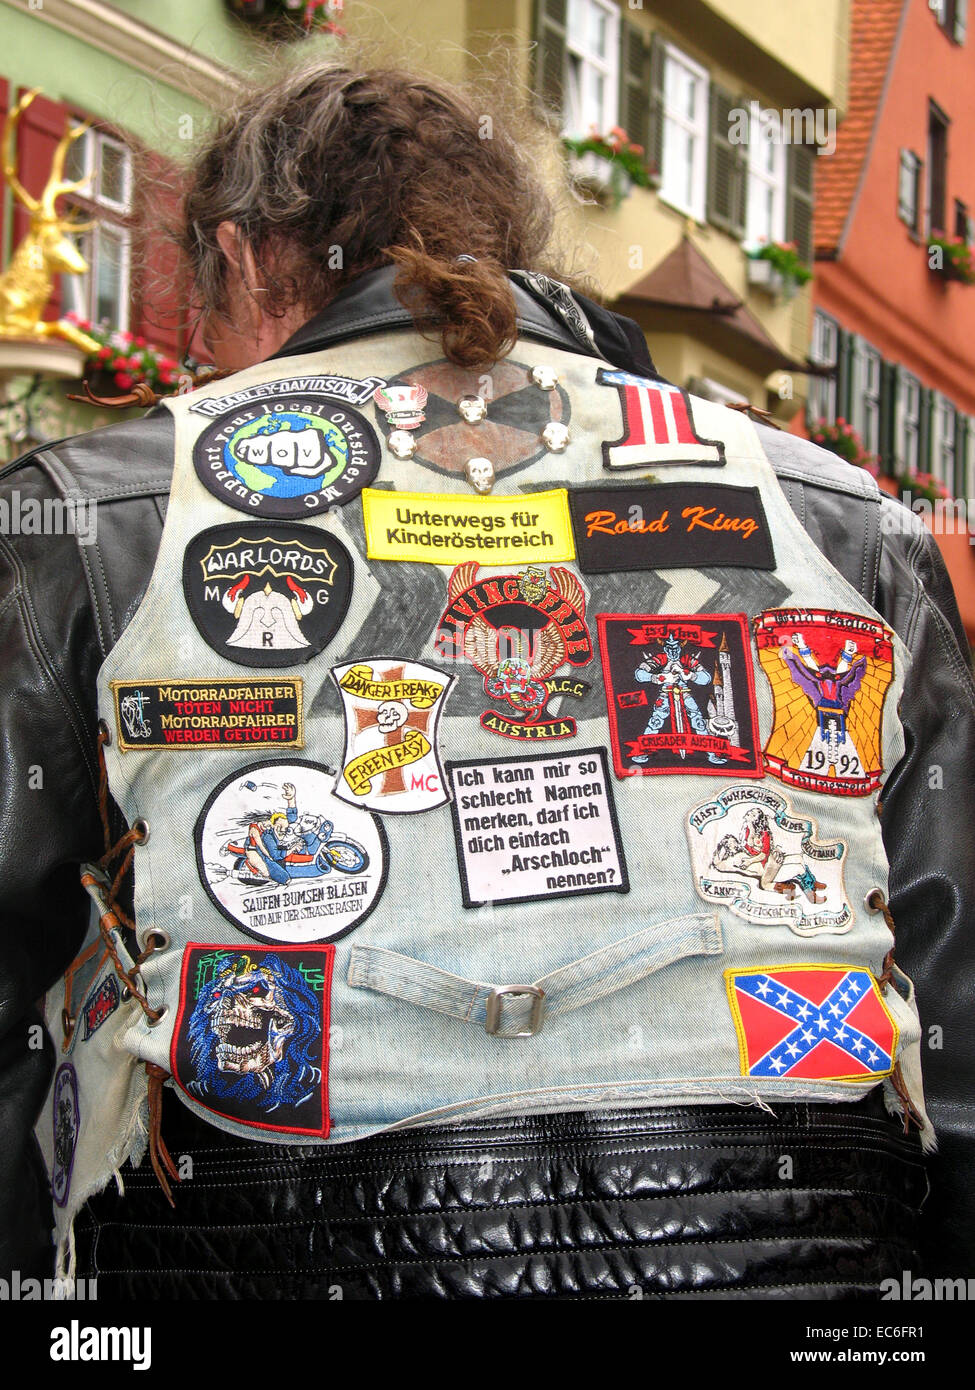 Leather jacket with patches Stock Photo - Alamy